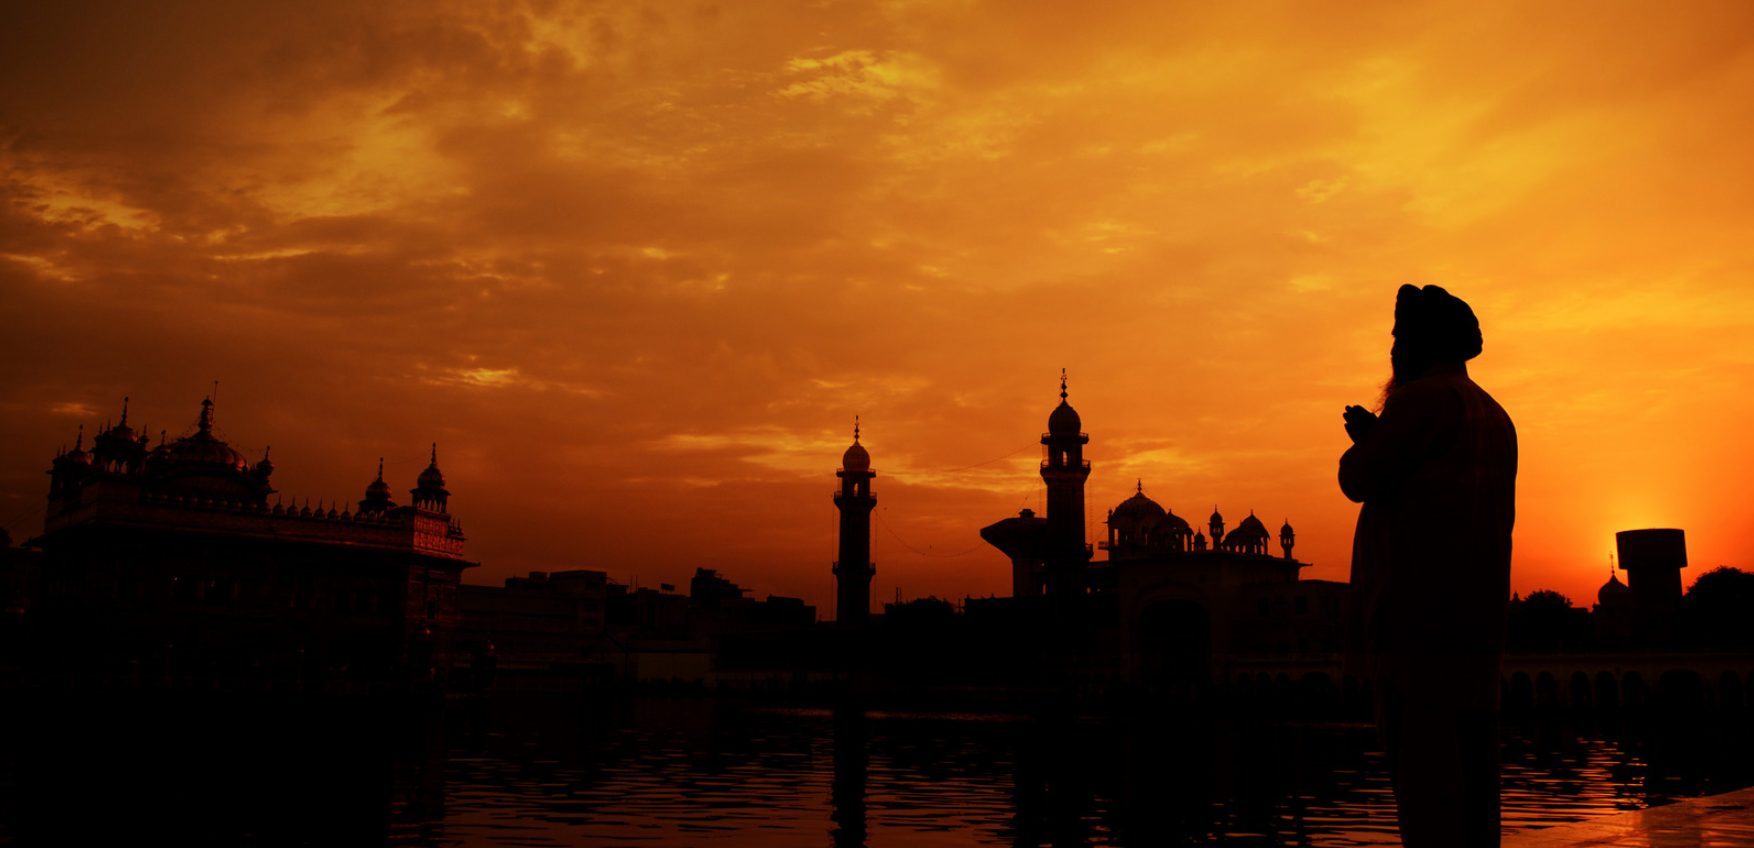 A Sikh man prays in front of an orange sunset